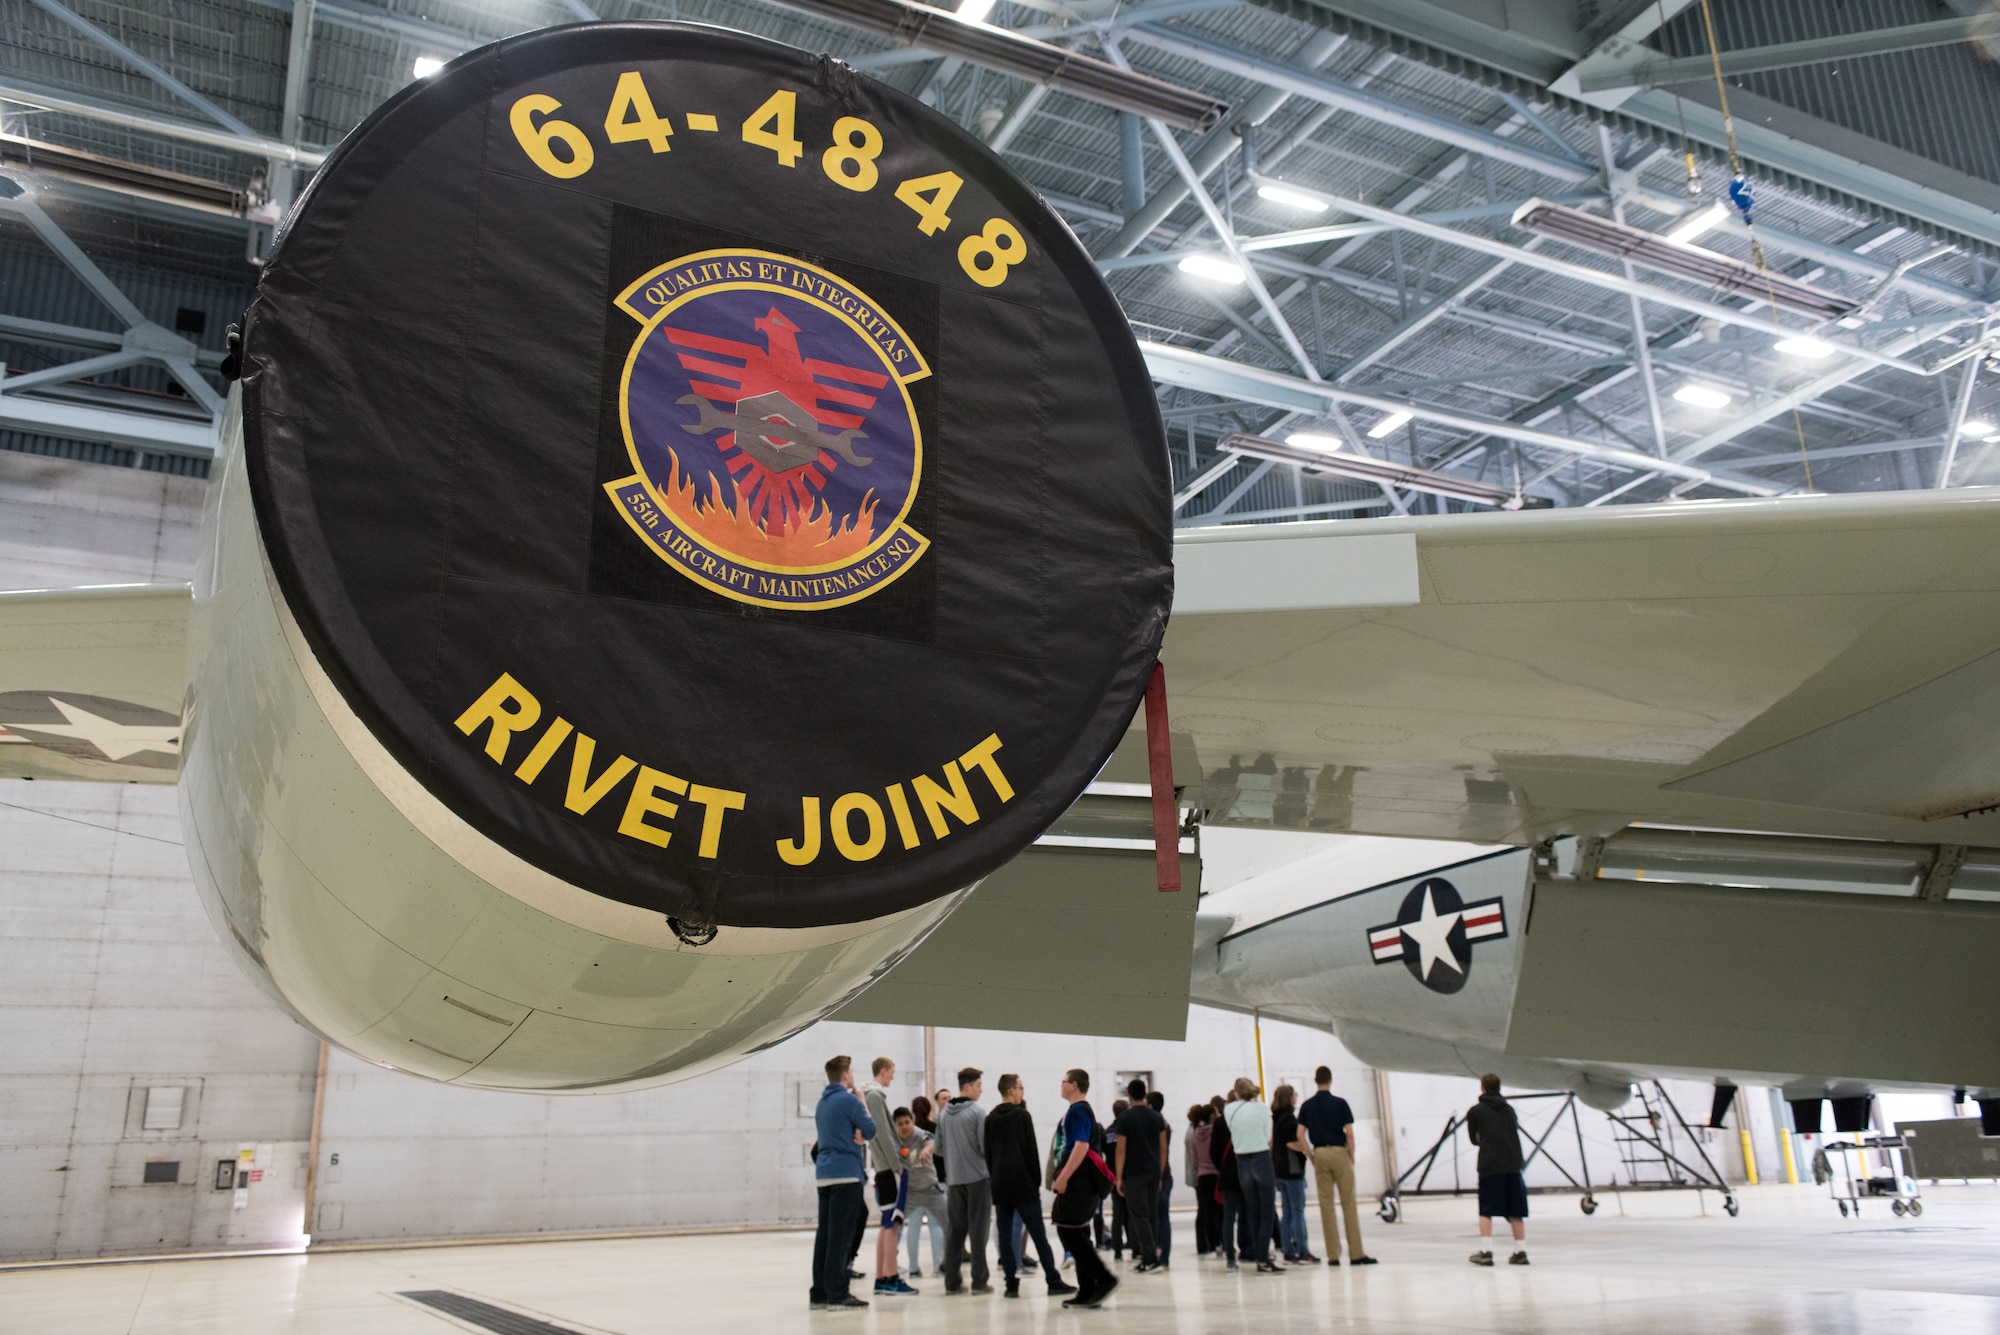 Students from Bellevue East High School touring the 55th Maintenance Squadron visit a RC-135 Rivet Joint aircraft Feb. 27, 2018 at Offutt Air Force Base, Nebraska. The students have recently been studying the science of flight, so many of the tour stops allowed them to gain a deeper understanding of what goes into keeping aircraft ready for flight. (U.S. Air Force photo by Senior Airman Jacob Skovo)